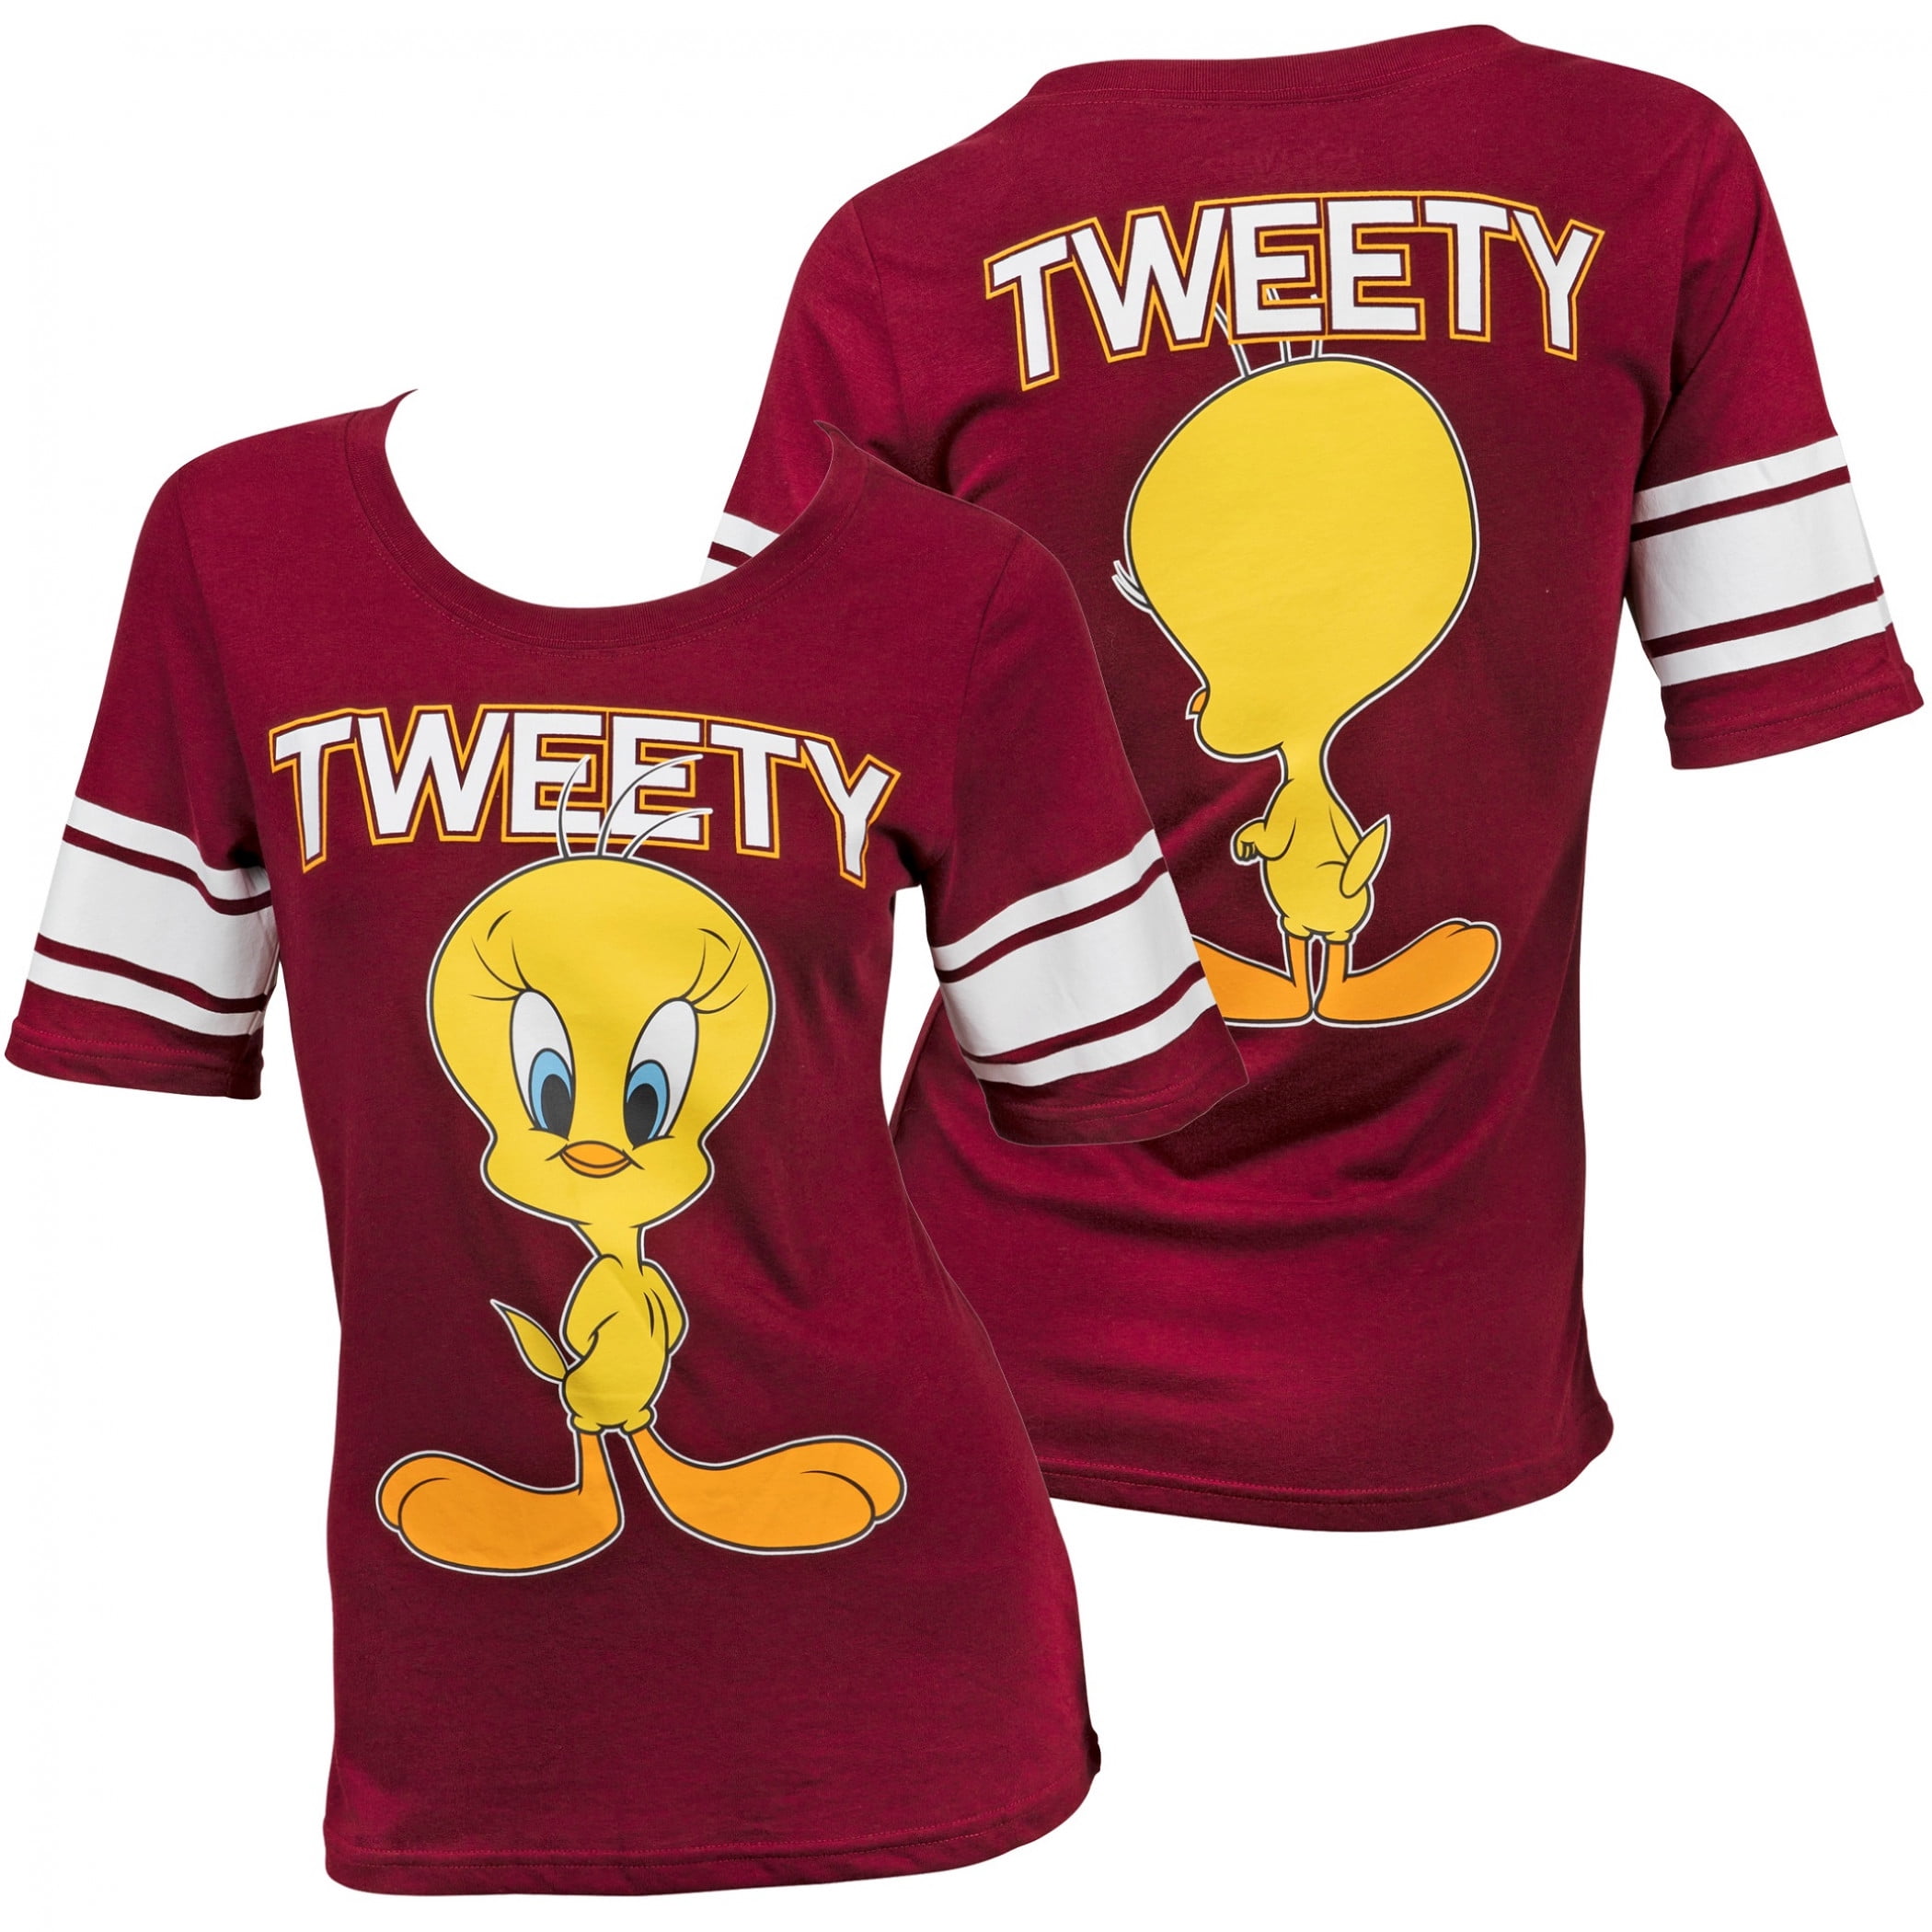 Looney Tunes Tweety Bird Front and Back Print Women's T-Shirt-Large